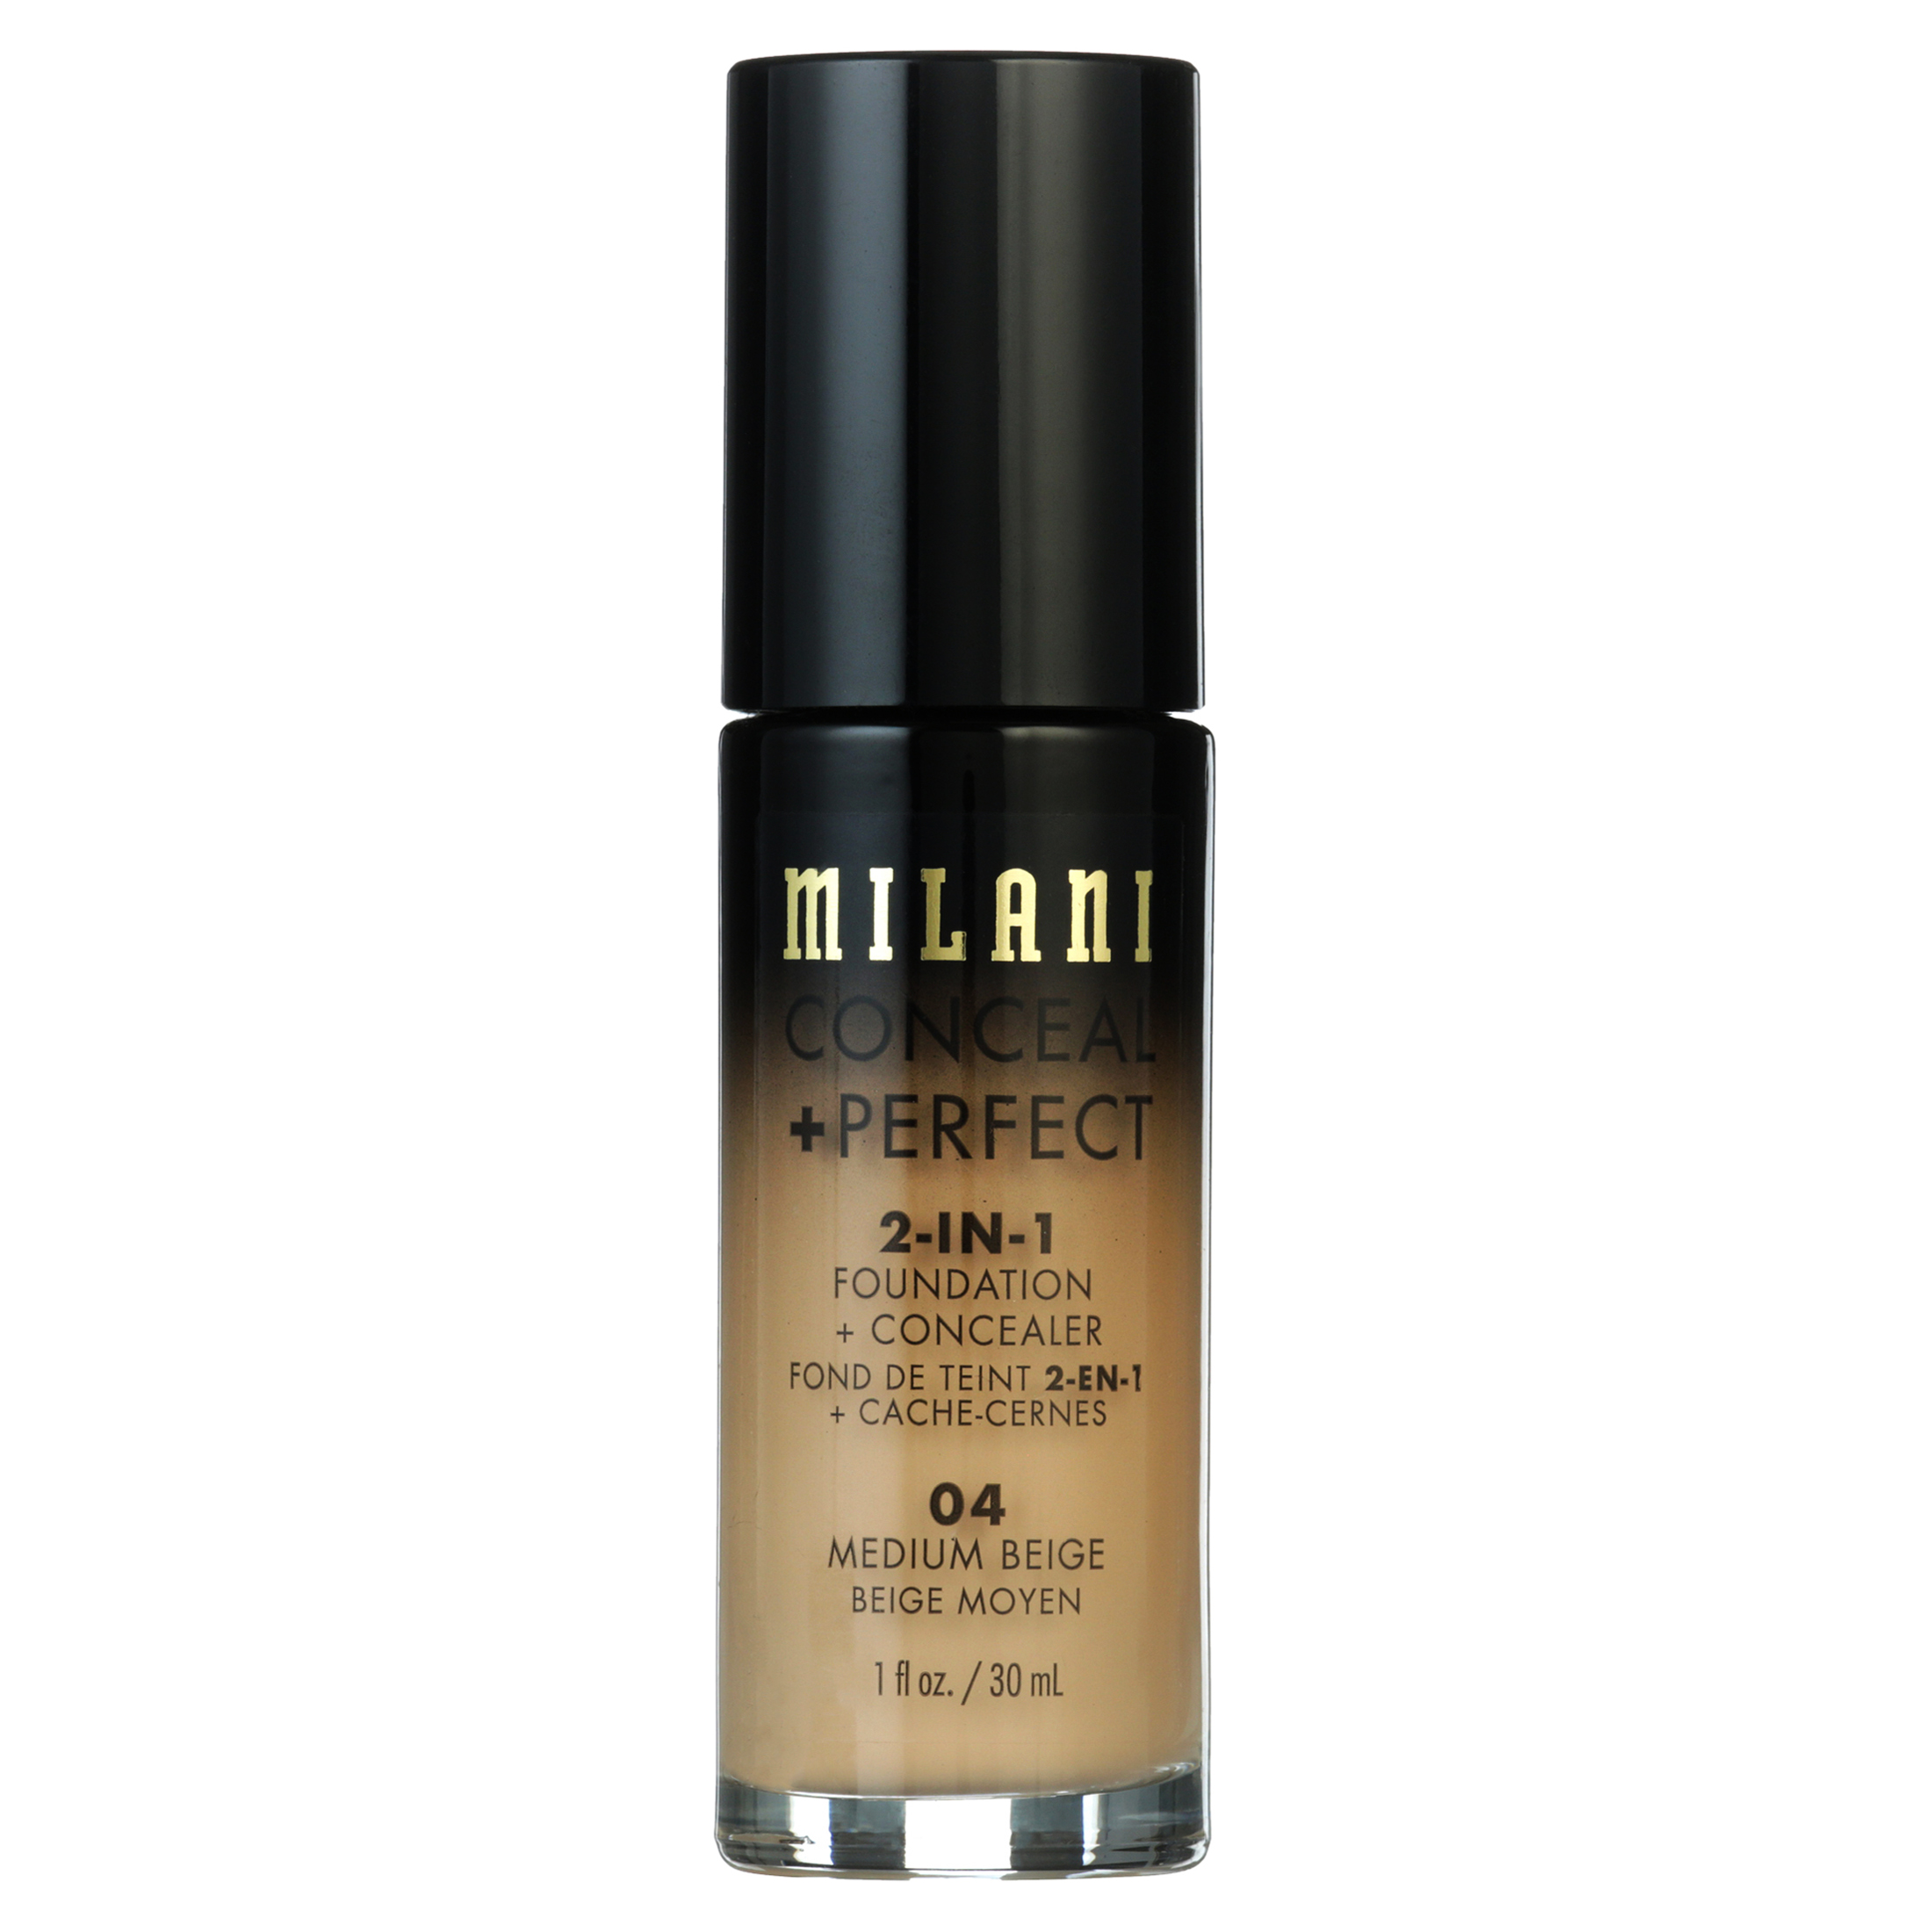 Milani Conceal + Perfect 2-in-1 Foundation + Concealer, Medium Beige - image 3 of 7